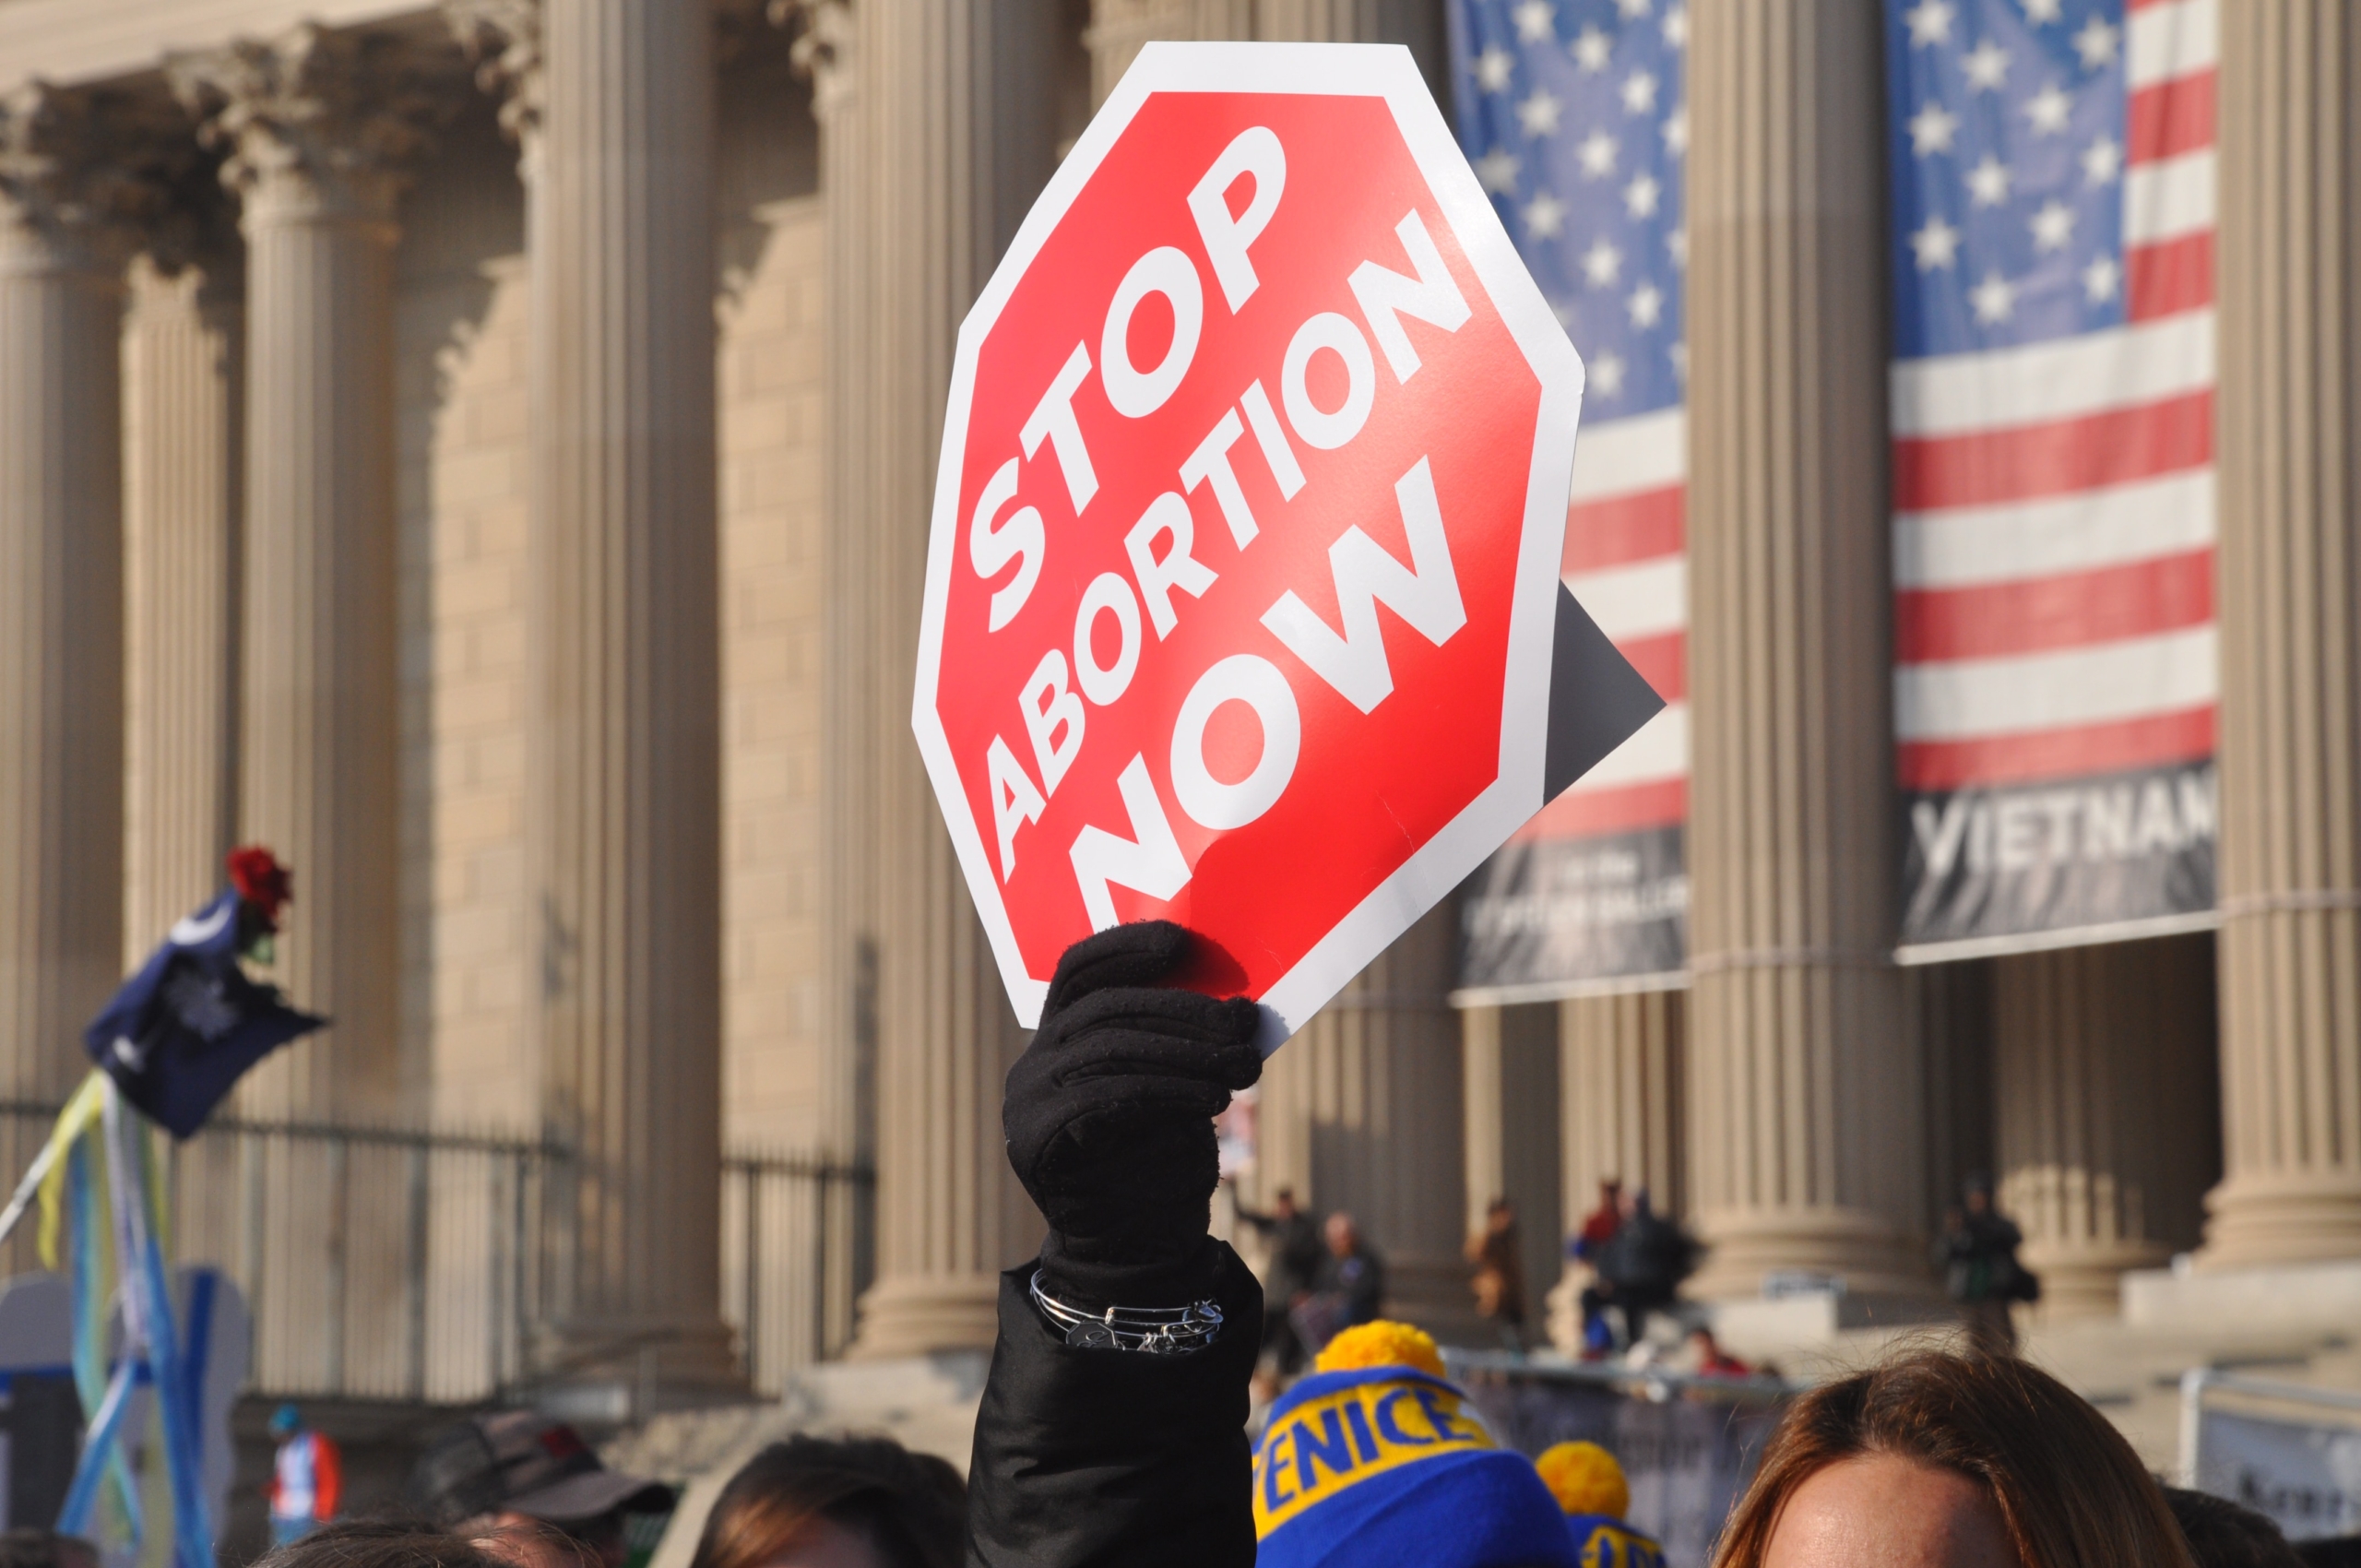 The abortion vote is viewed as a pivotal moment in history.